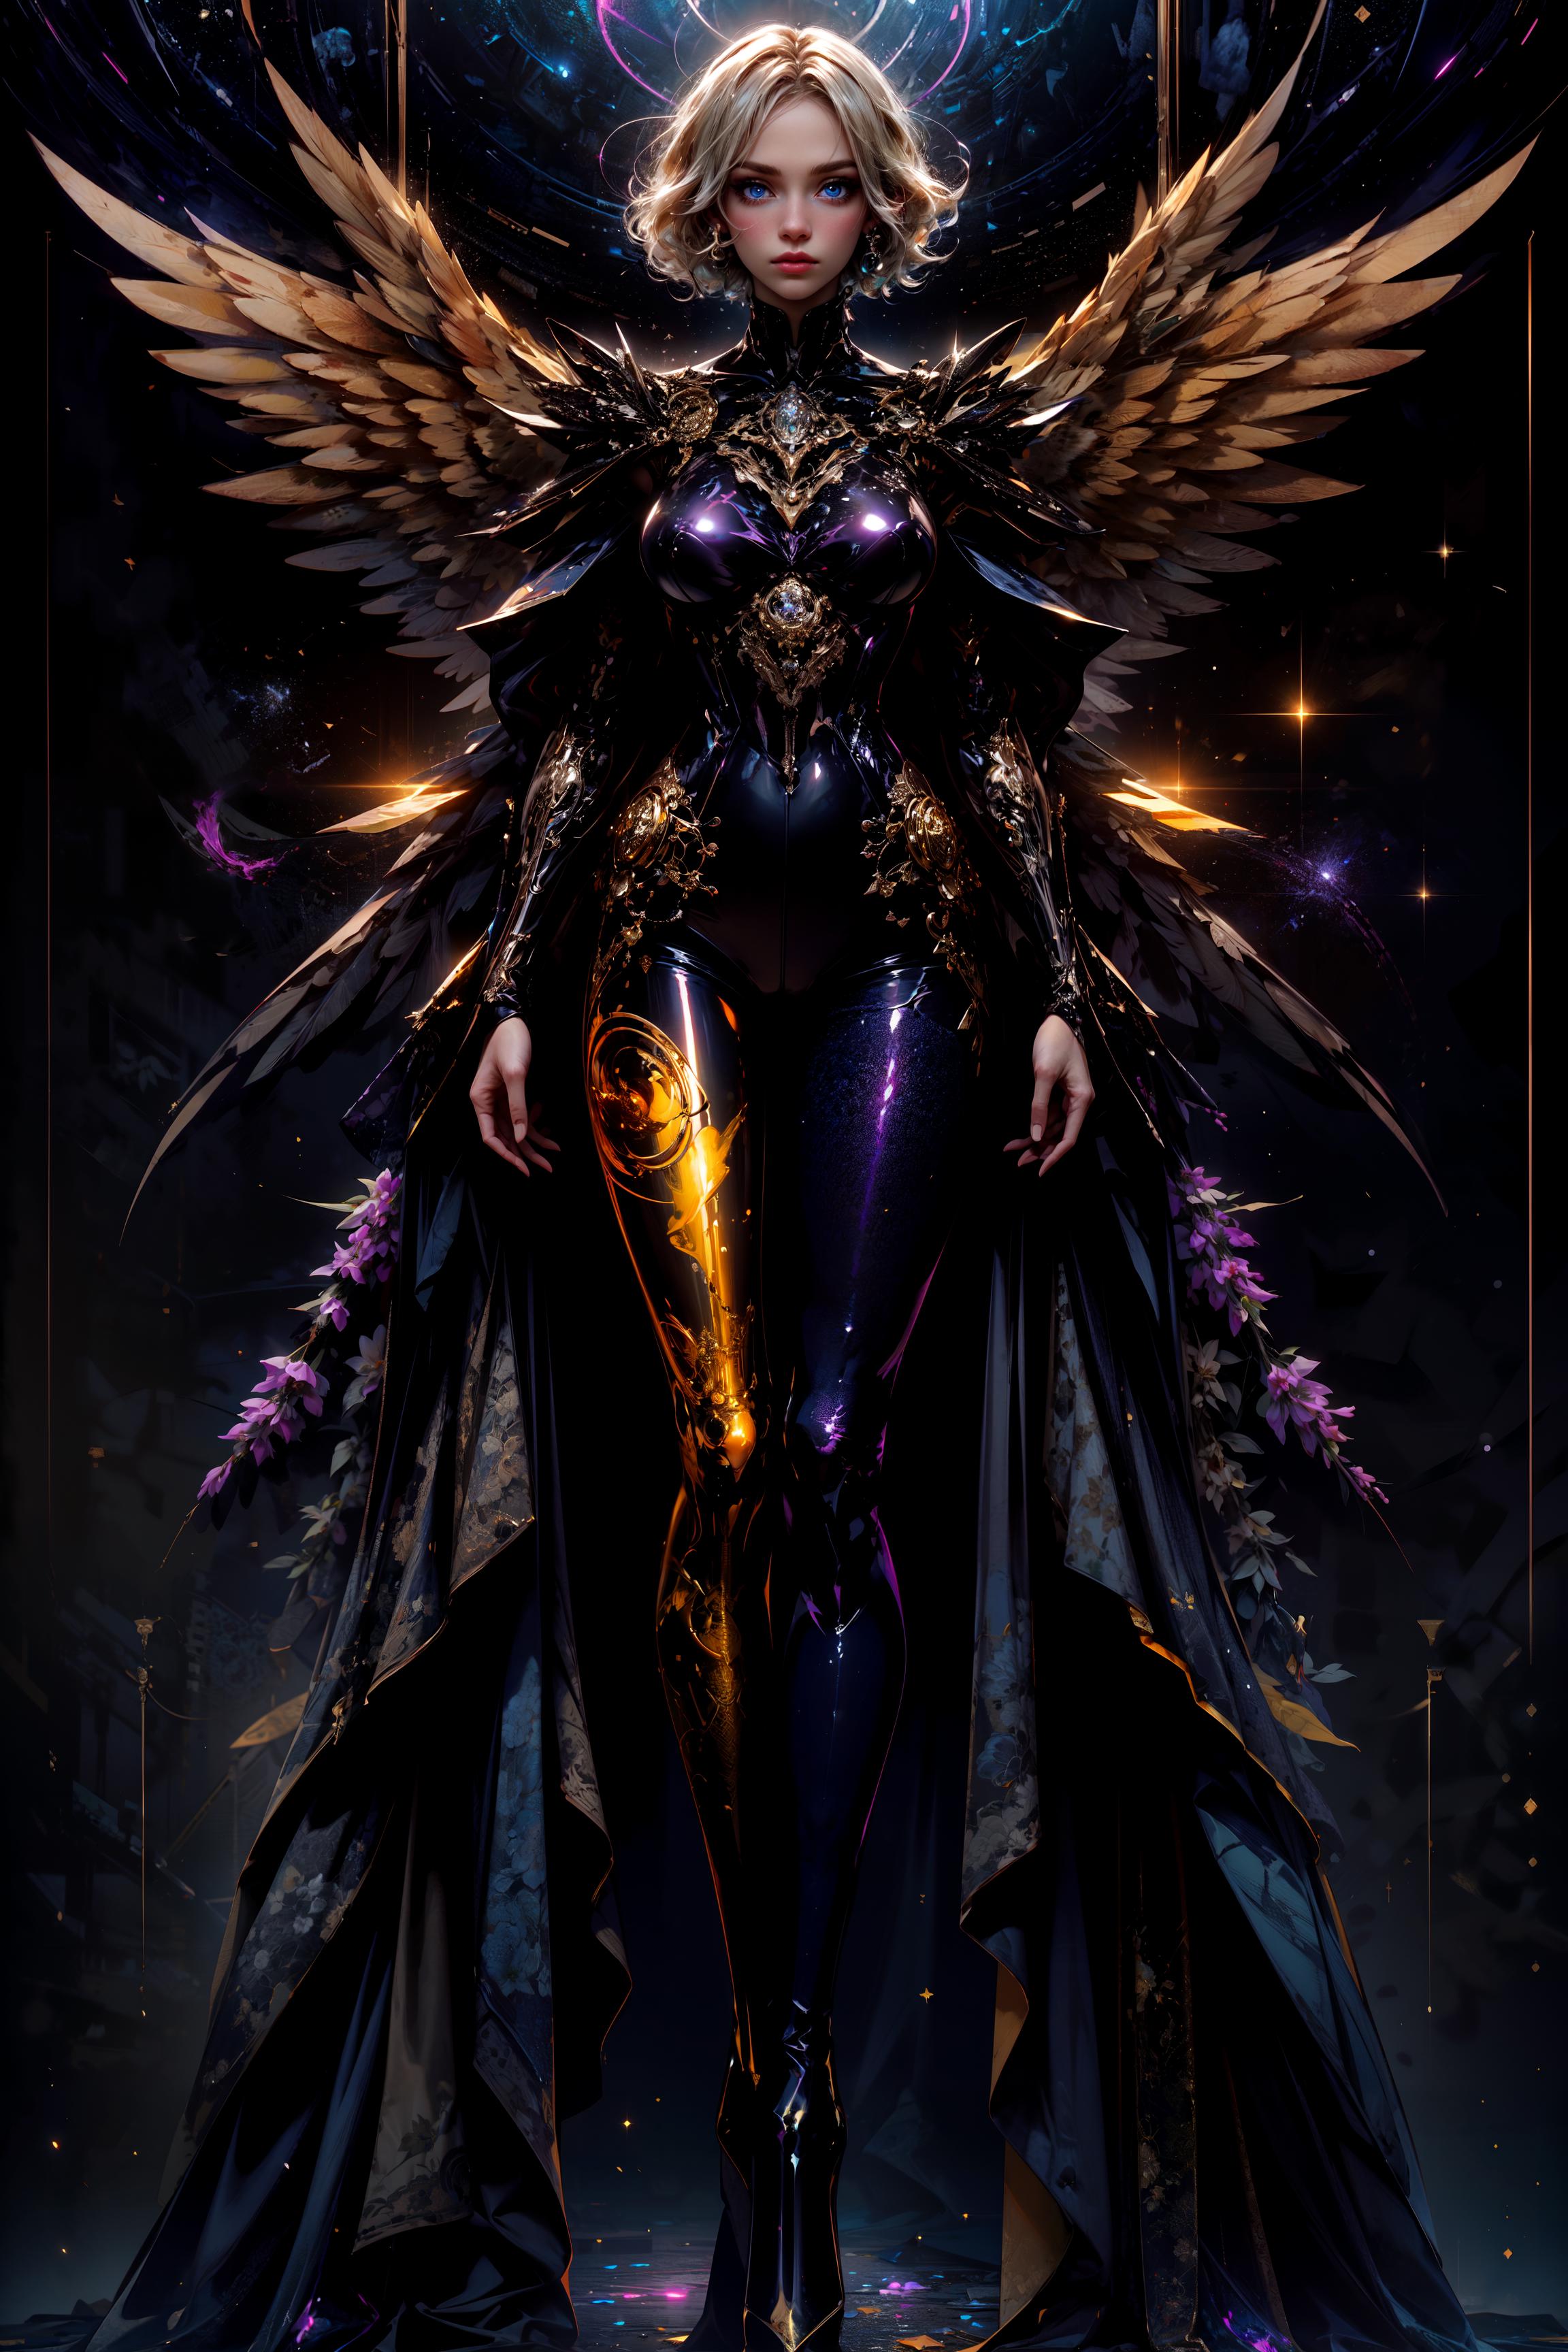 Fantasy Artwork Featuring a Woman with Purple Wings and a High-Tech Suit